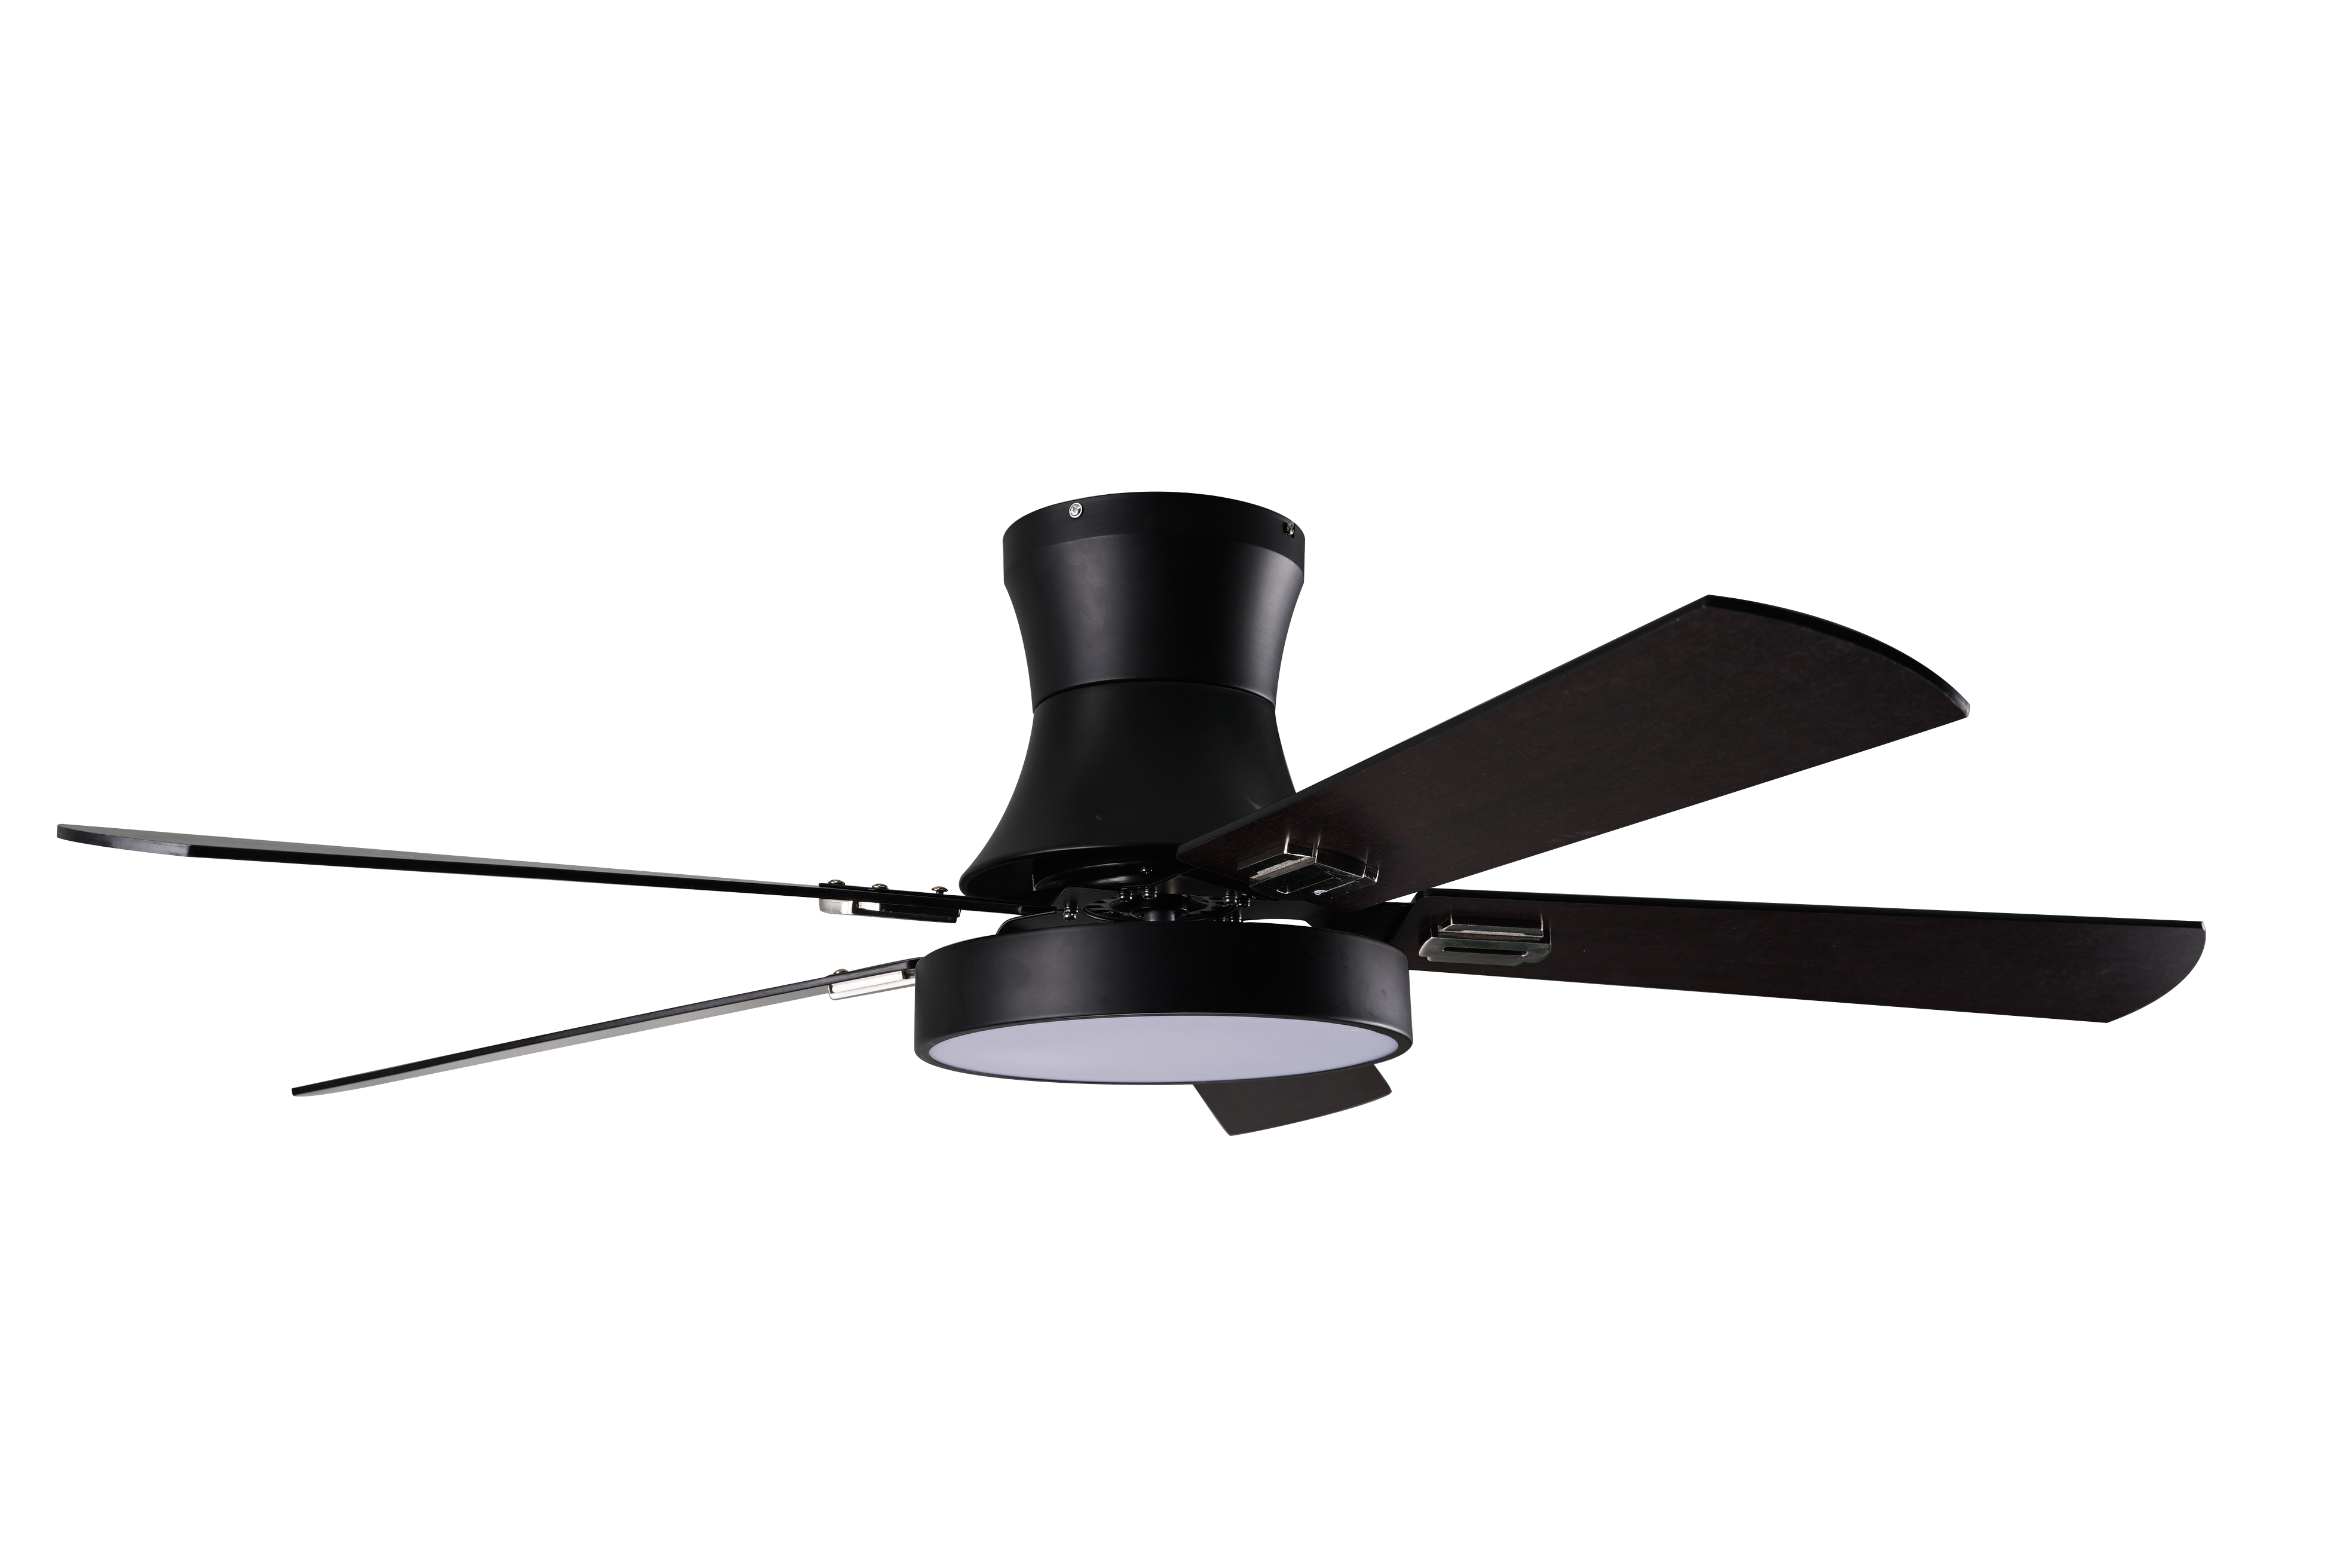 AirBena Hot Sale Ceiling Fans with Led Lights Remote Control for Living Room